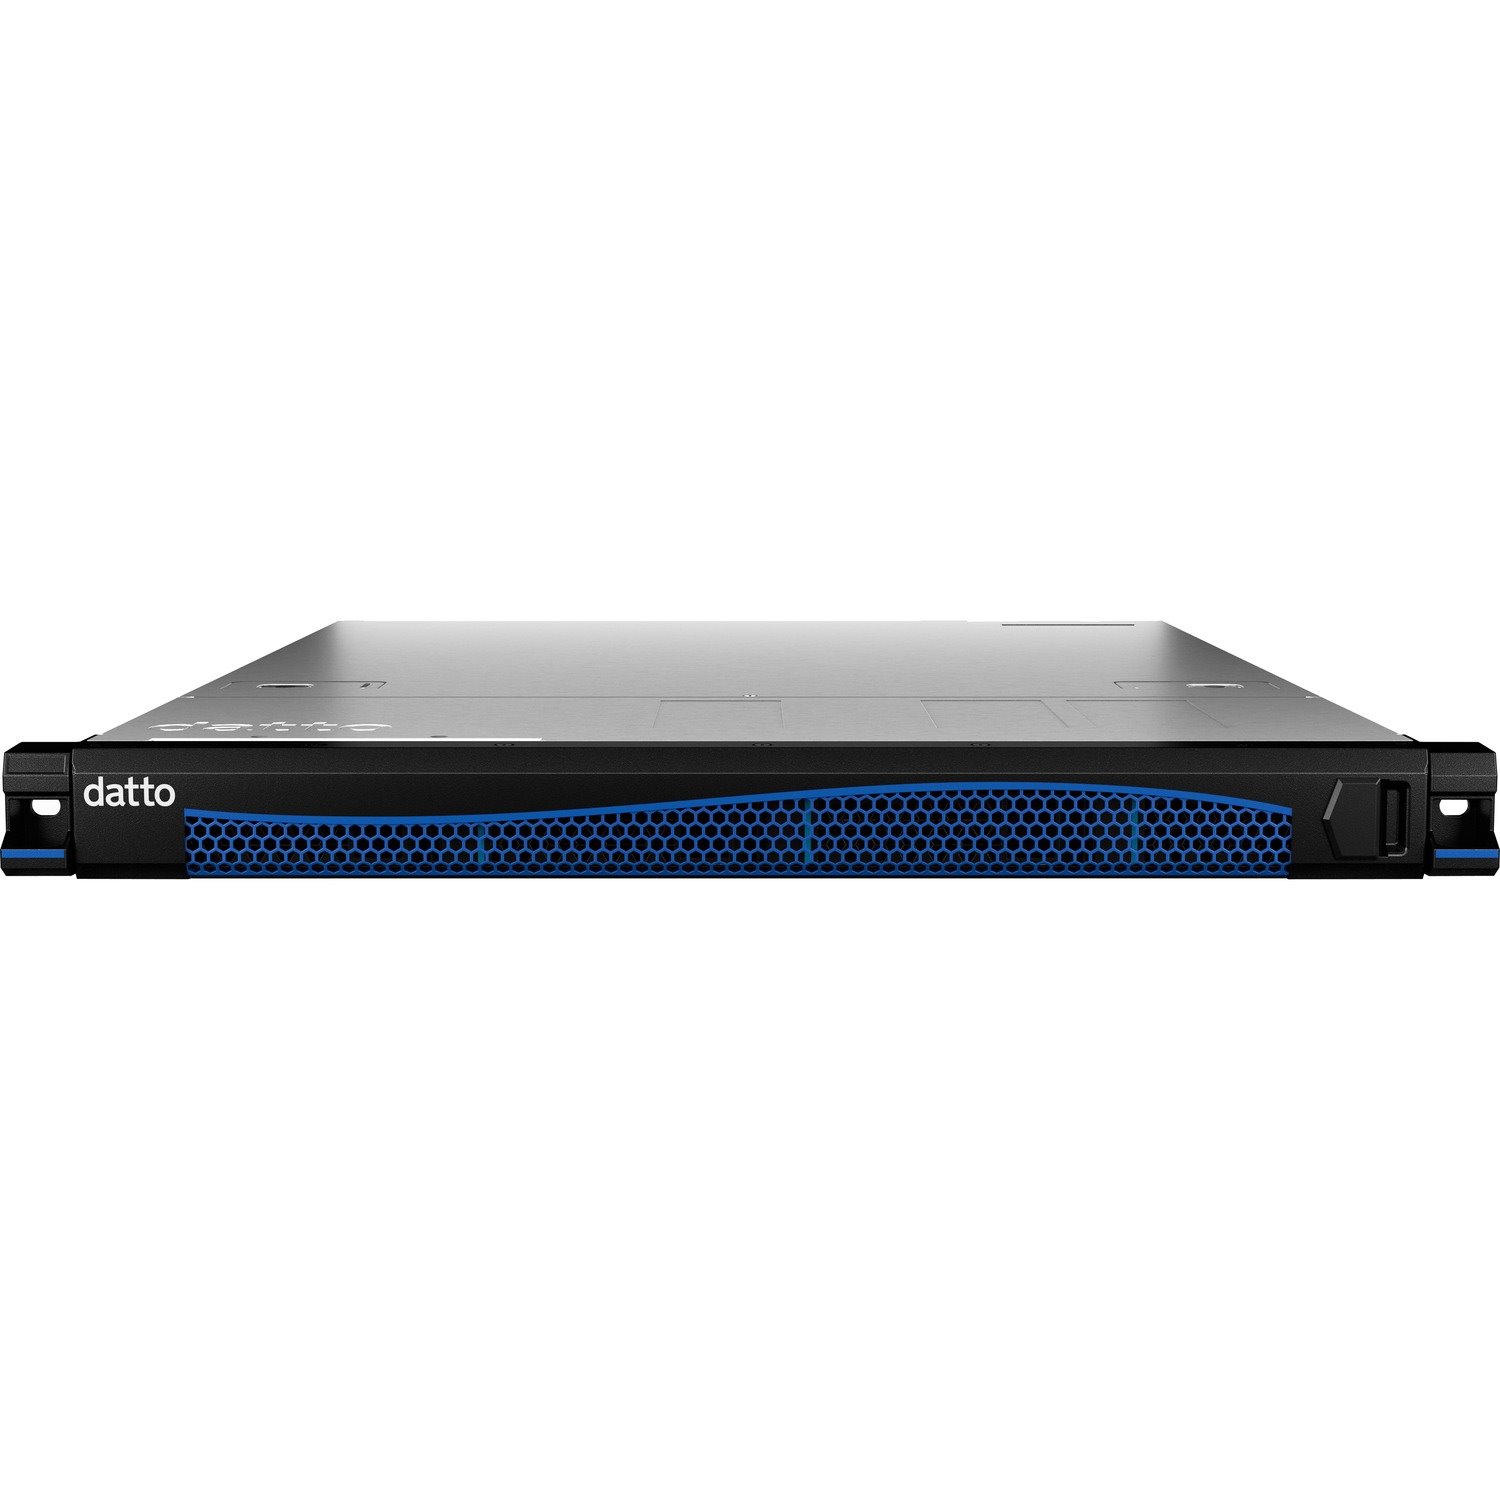 Datto Siris 4 P 6TB Backup, Continuity & Disaster Recovery Appliance